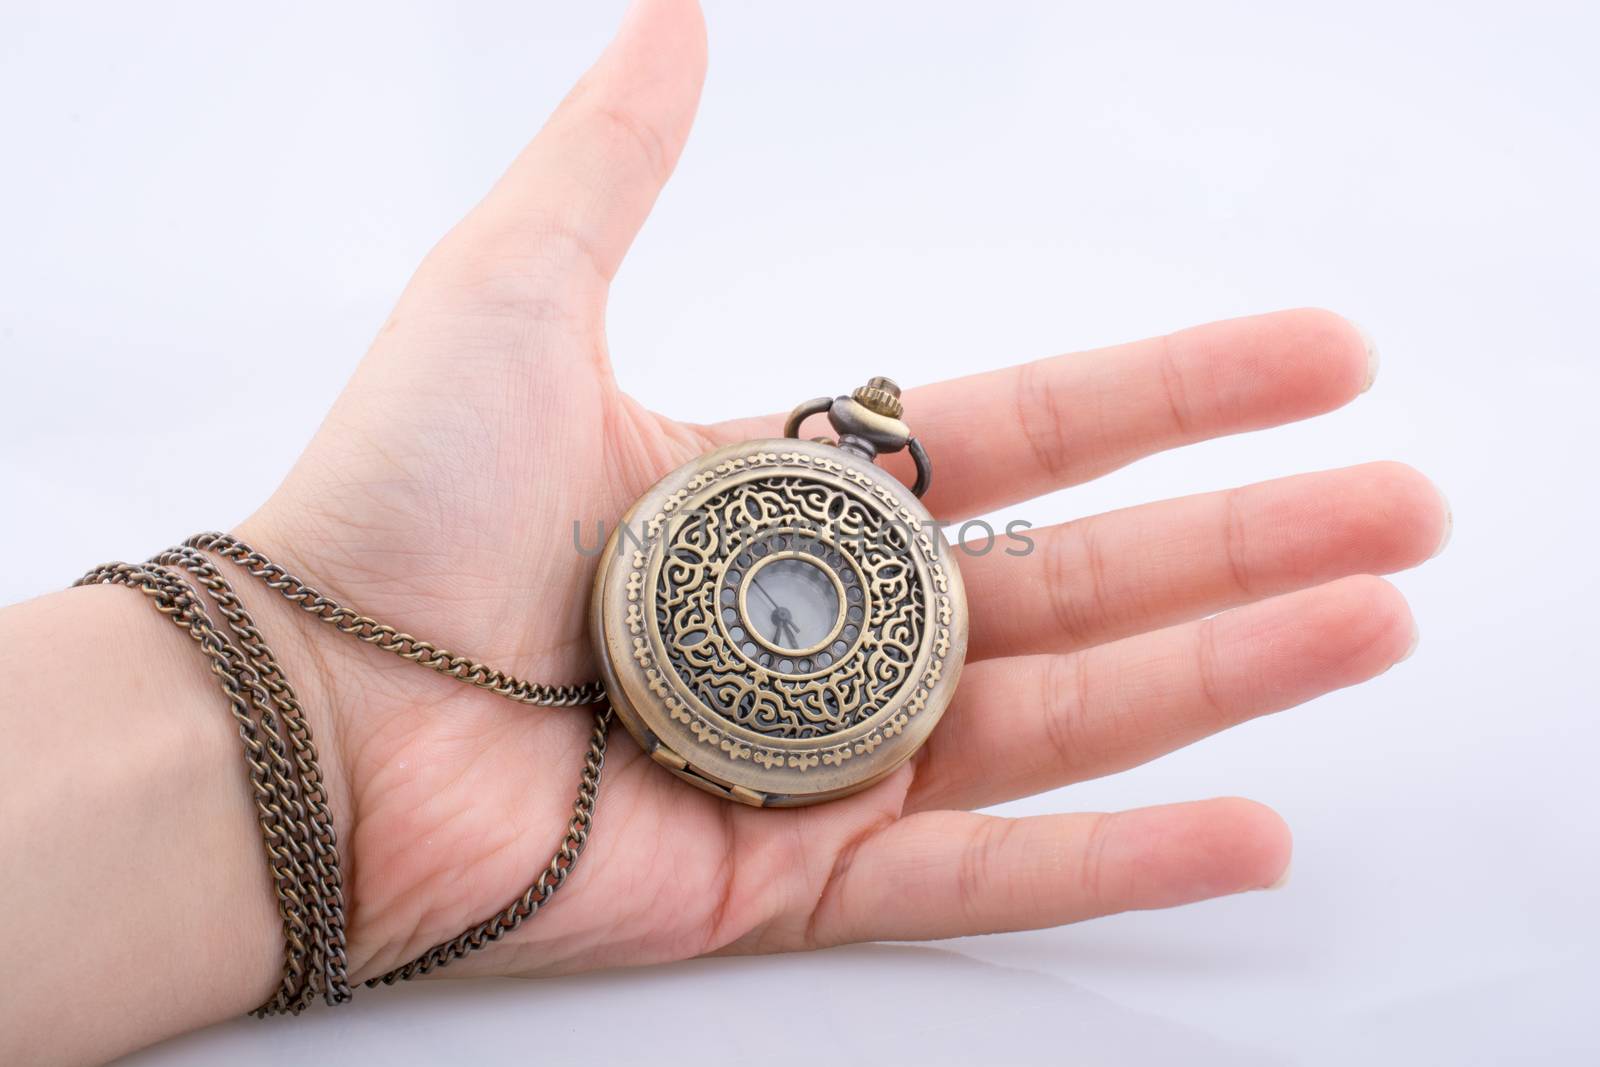 Retro style classic pocket watch in hand by berkay